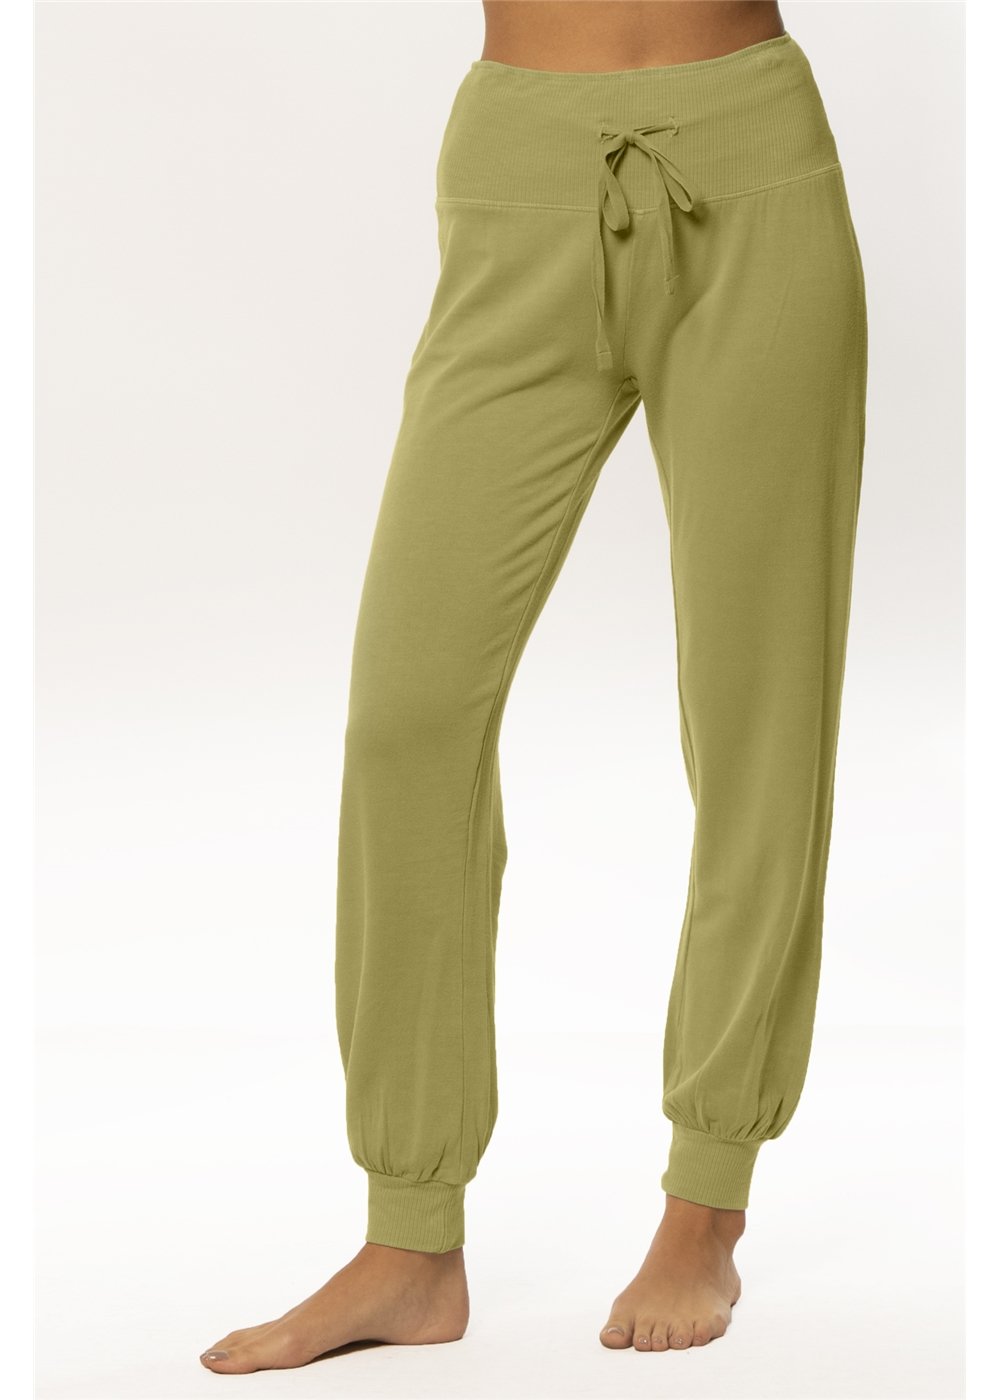 Amuse Society Women's Eternity Knit Pant in Cactus. Front View on Model.